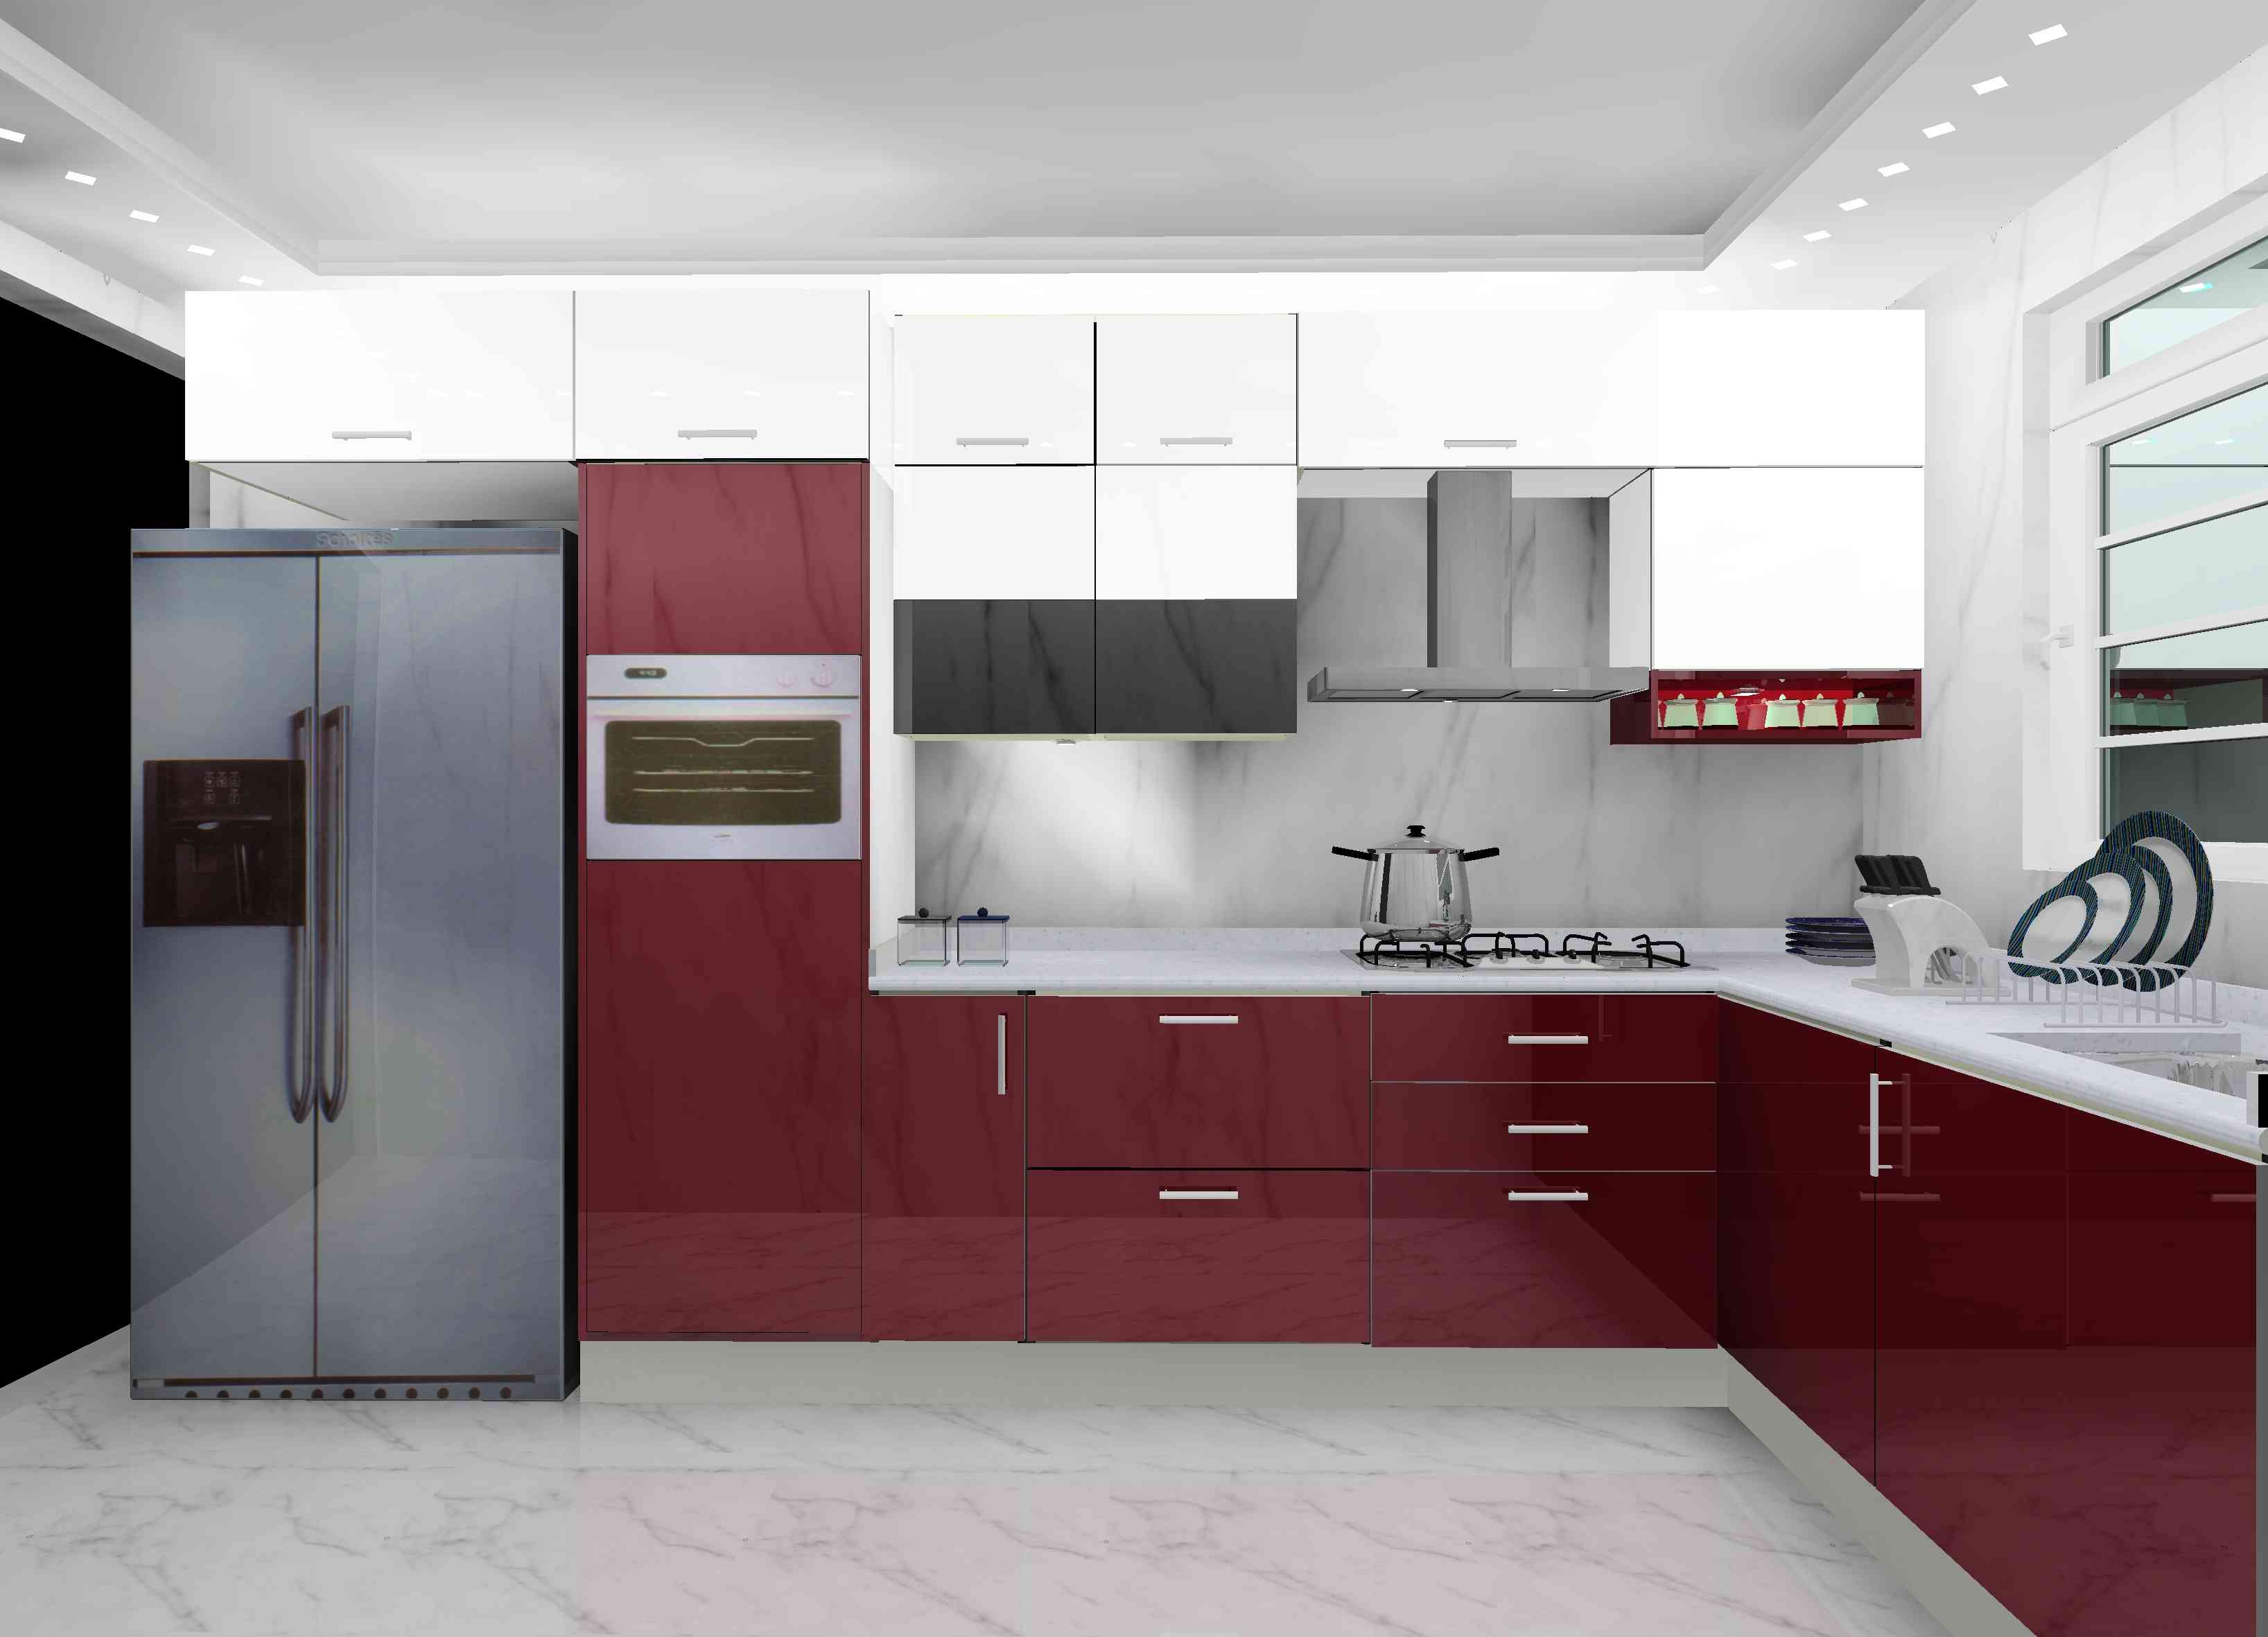 Contemporary L-Shaped Laminated Modular Kitchen Design With Red And White Cabinets